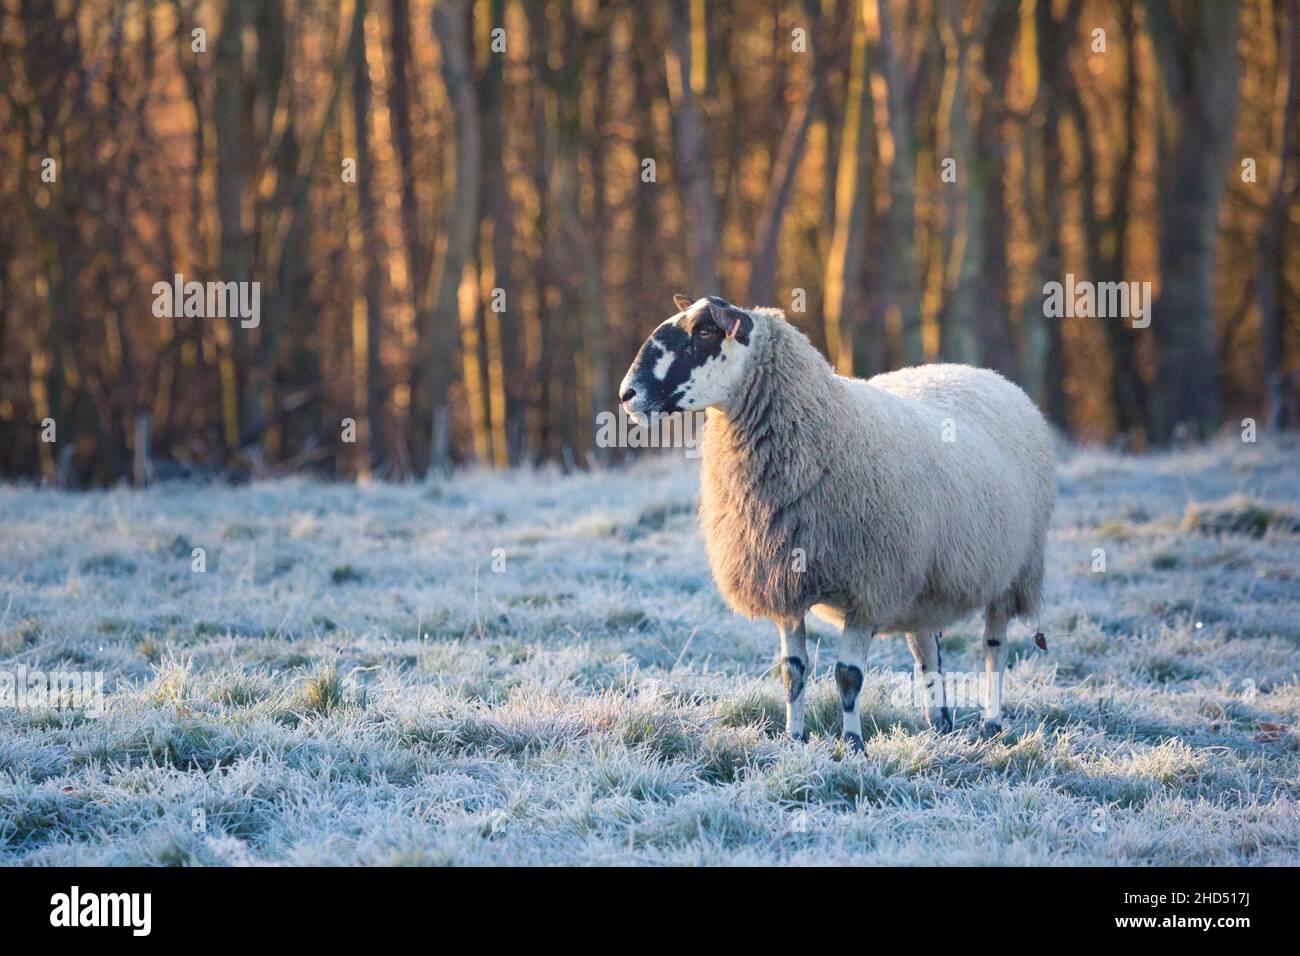 A herd or flock of sheep with long wool coats on a frosty morning in winter time with sunrise light on the trees in a field on a farm Northumberland Stock Photo